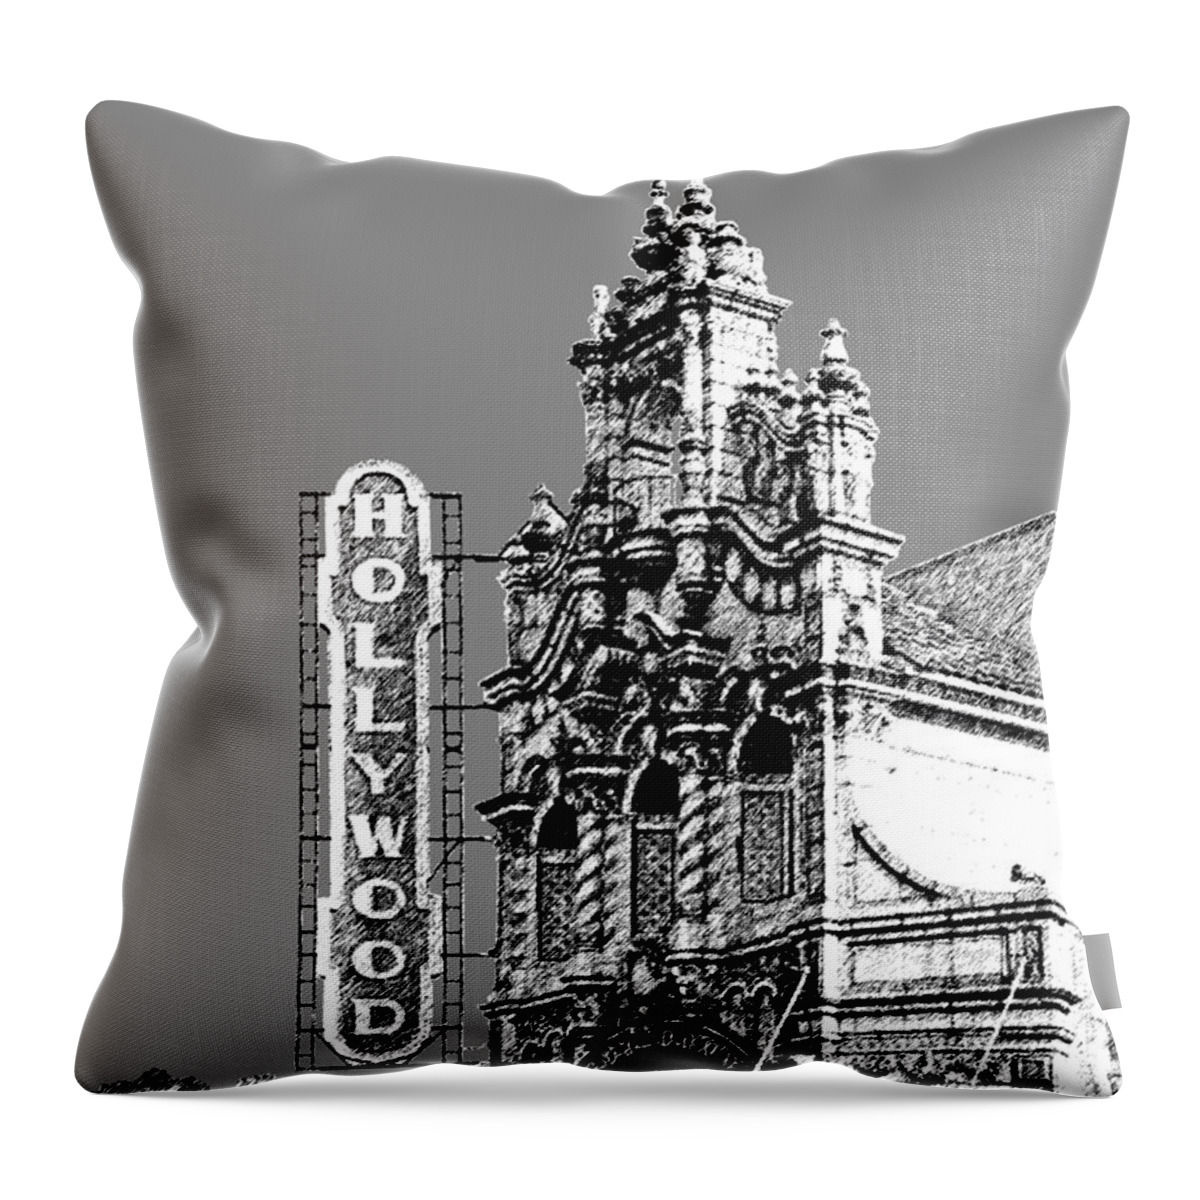 Architecture Throw Pillow featuring the digital art Portland Skyline Hollywood Theater - Pewter by DB Artist